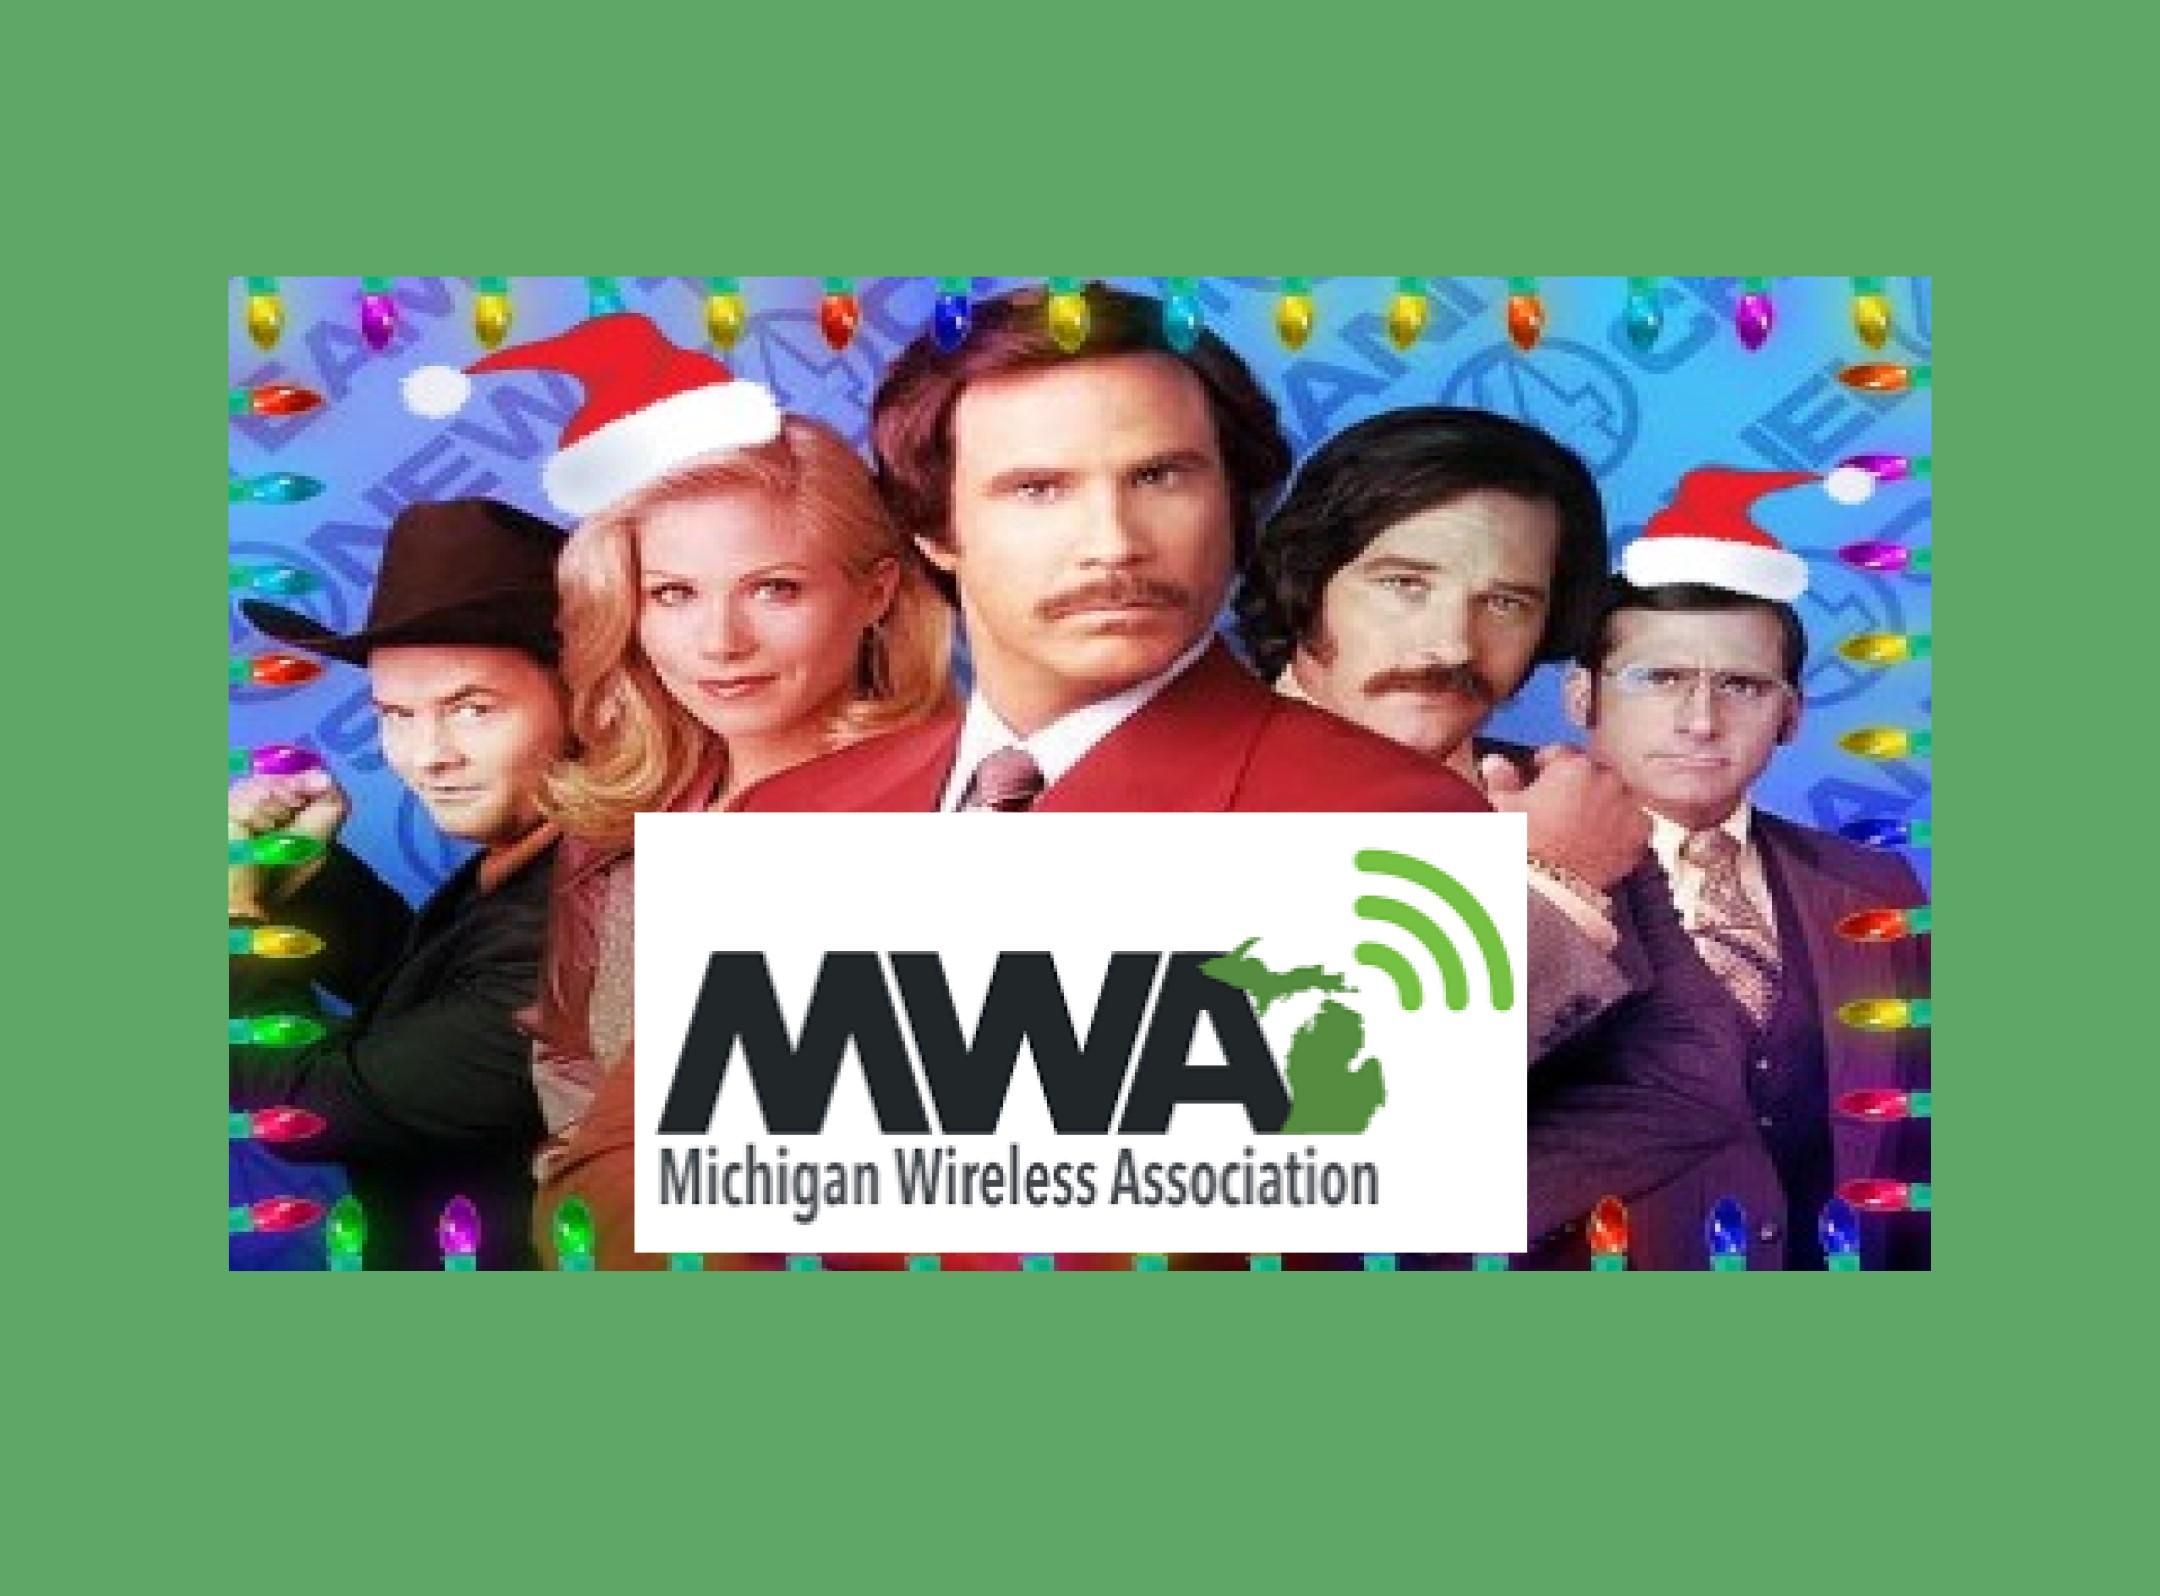 Recover From The Holidays with the Michigan Wireless Association